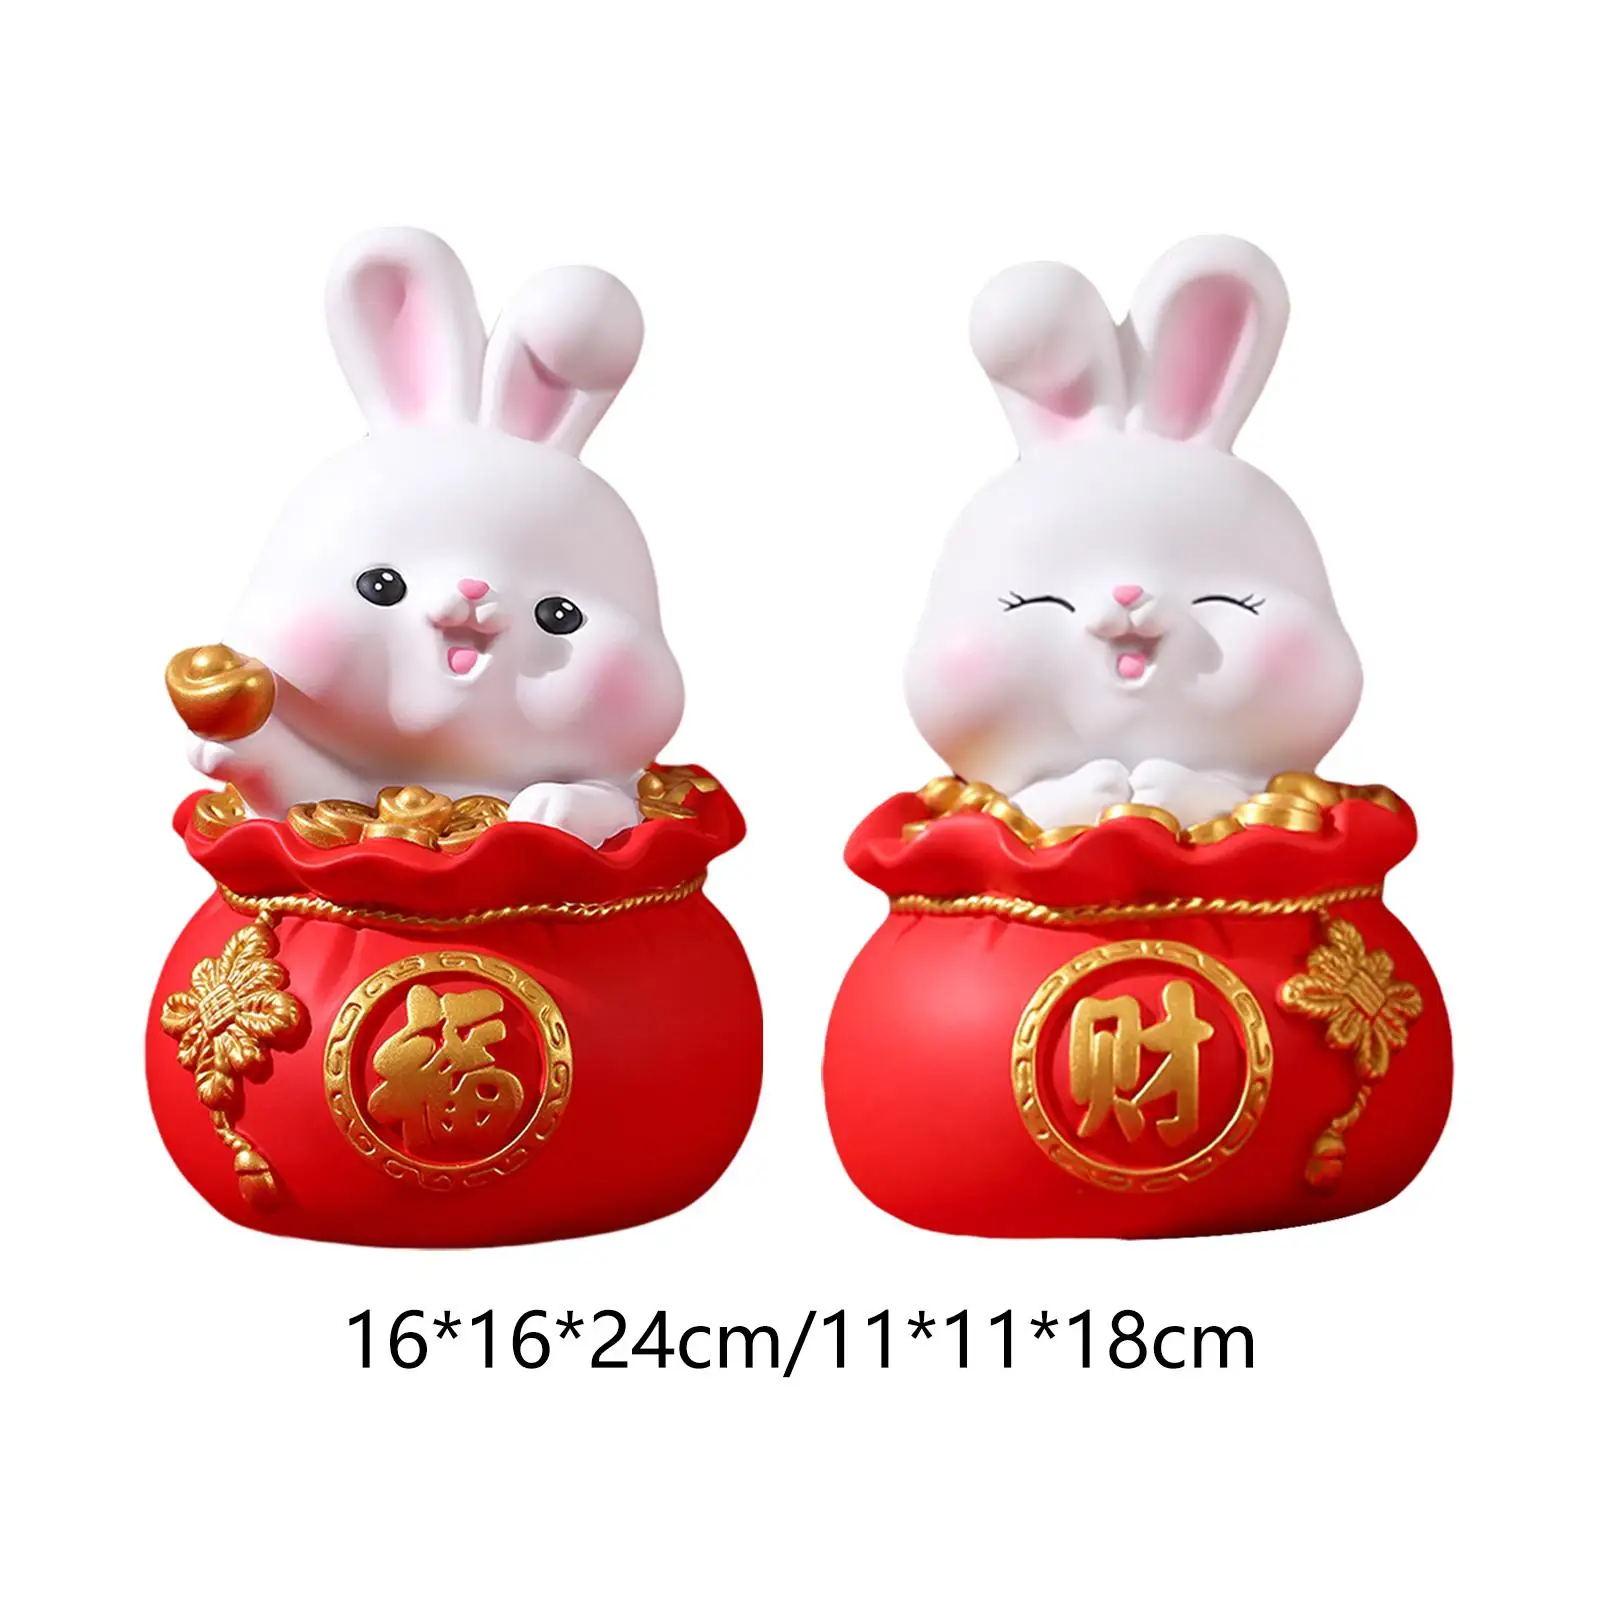 Chinese New Year Lucky Rabbit Statues Photo Prop Indoor Money Box Figurine for Office Wedding Decorative Housewarming Gif